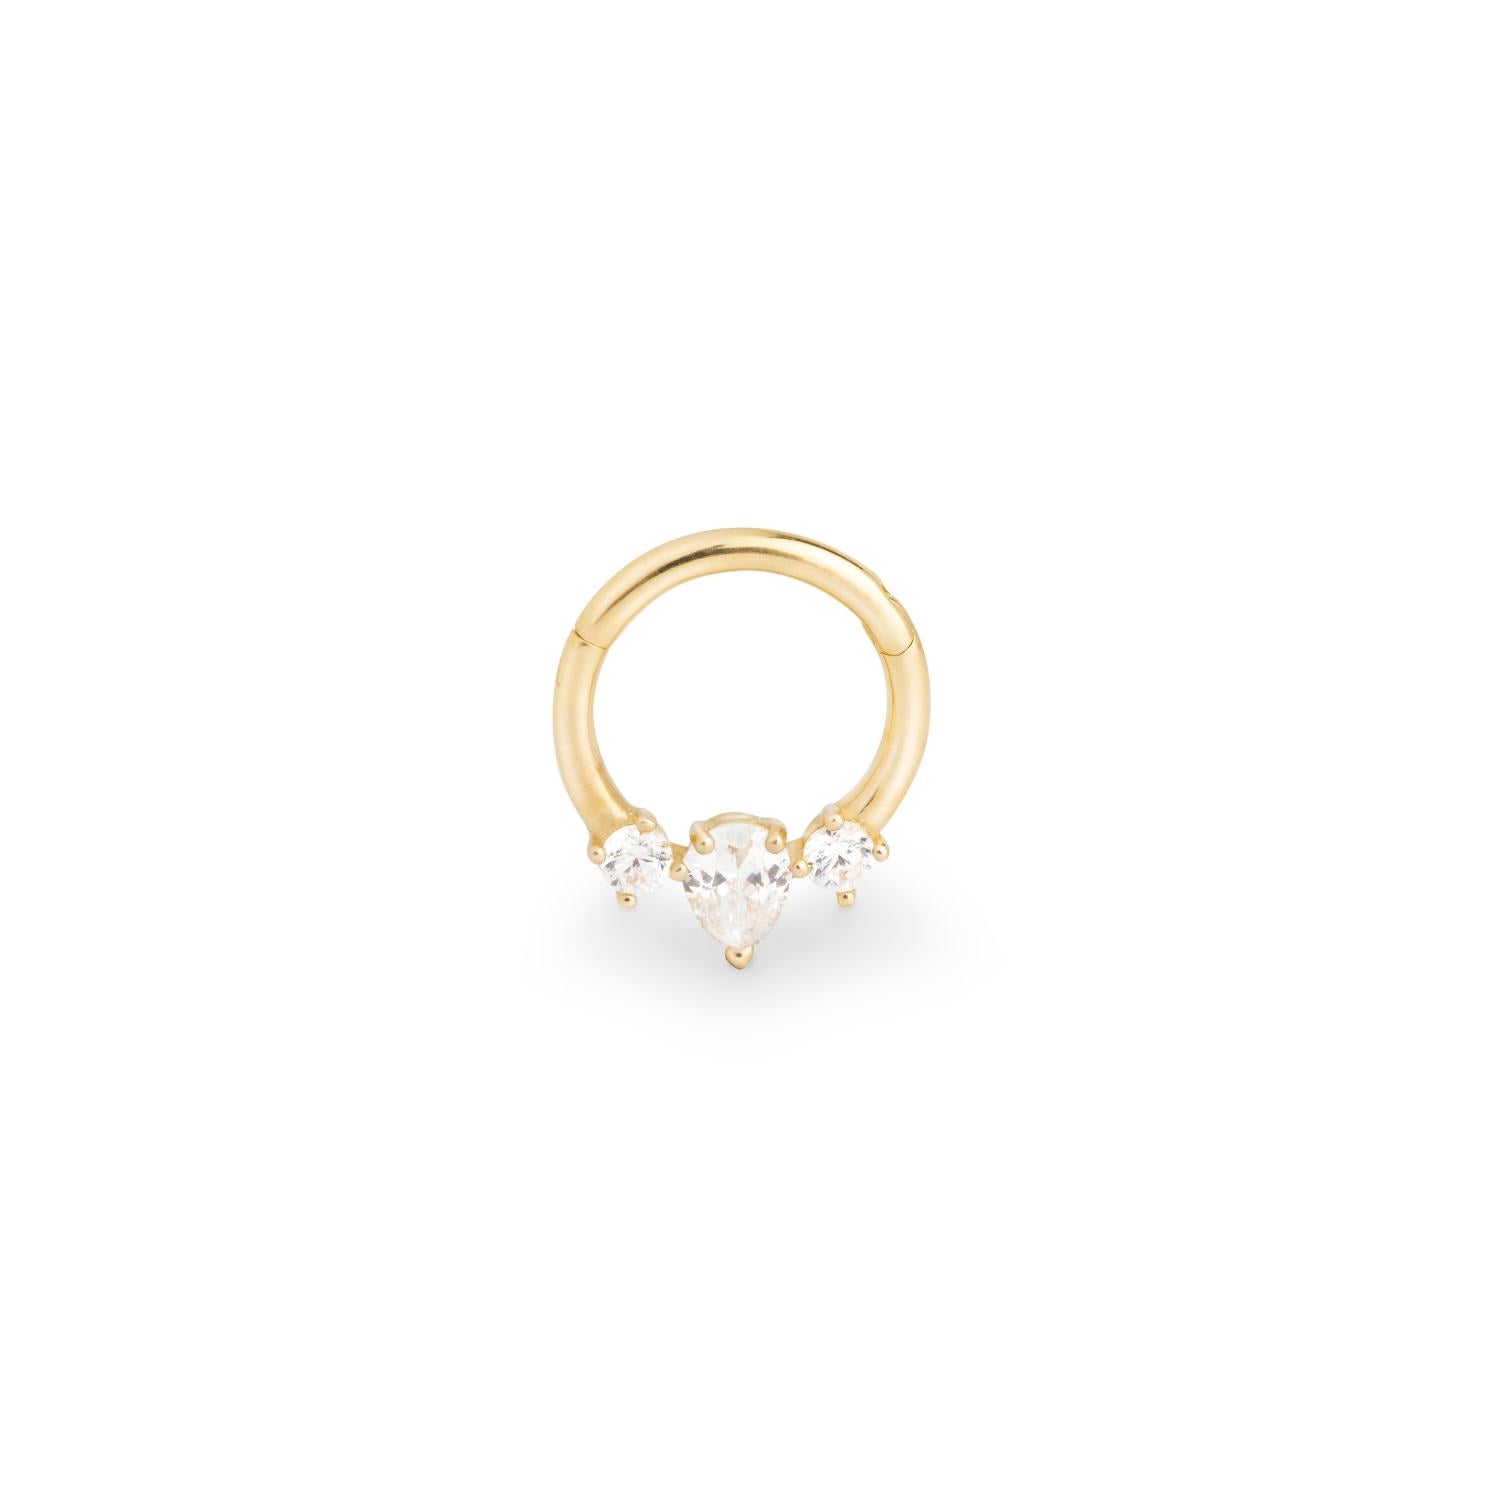 Rica 9k solid yellow gold daith single hoop earring - Helix & Conch